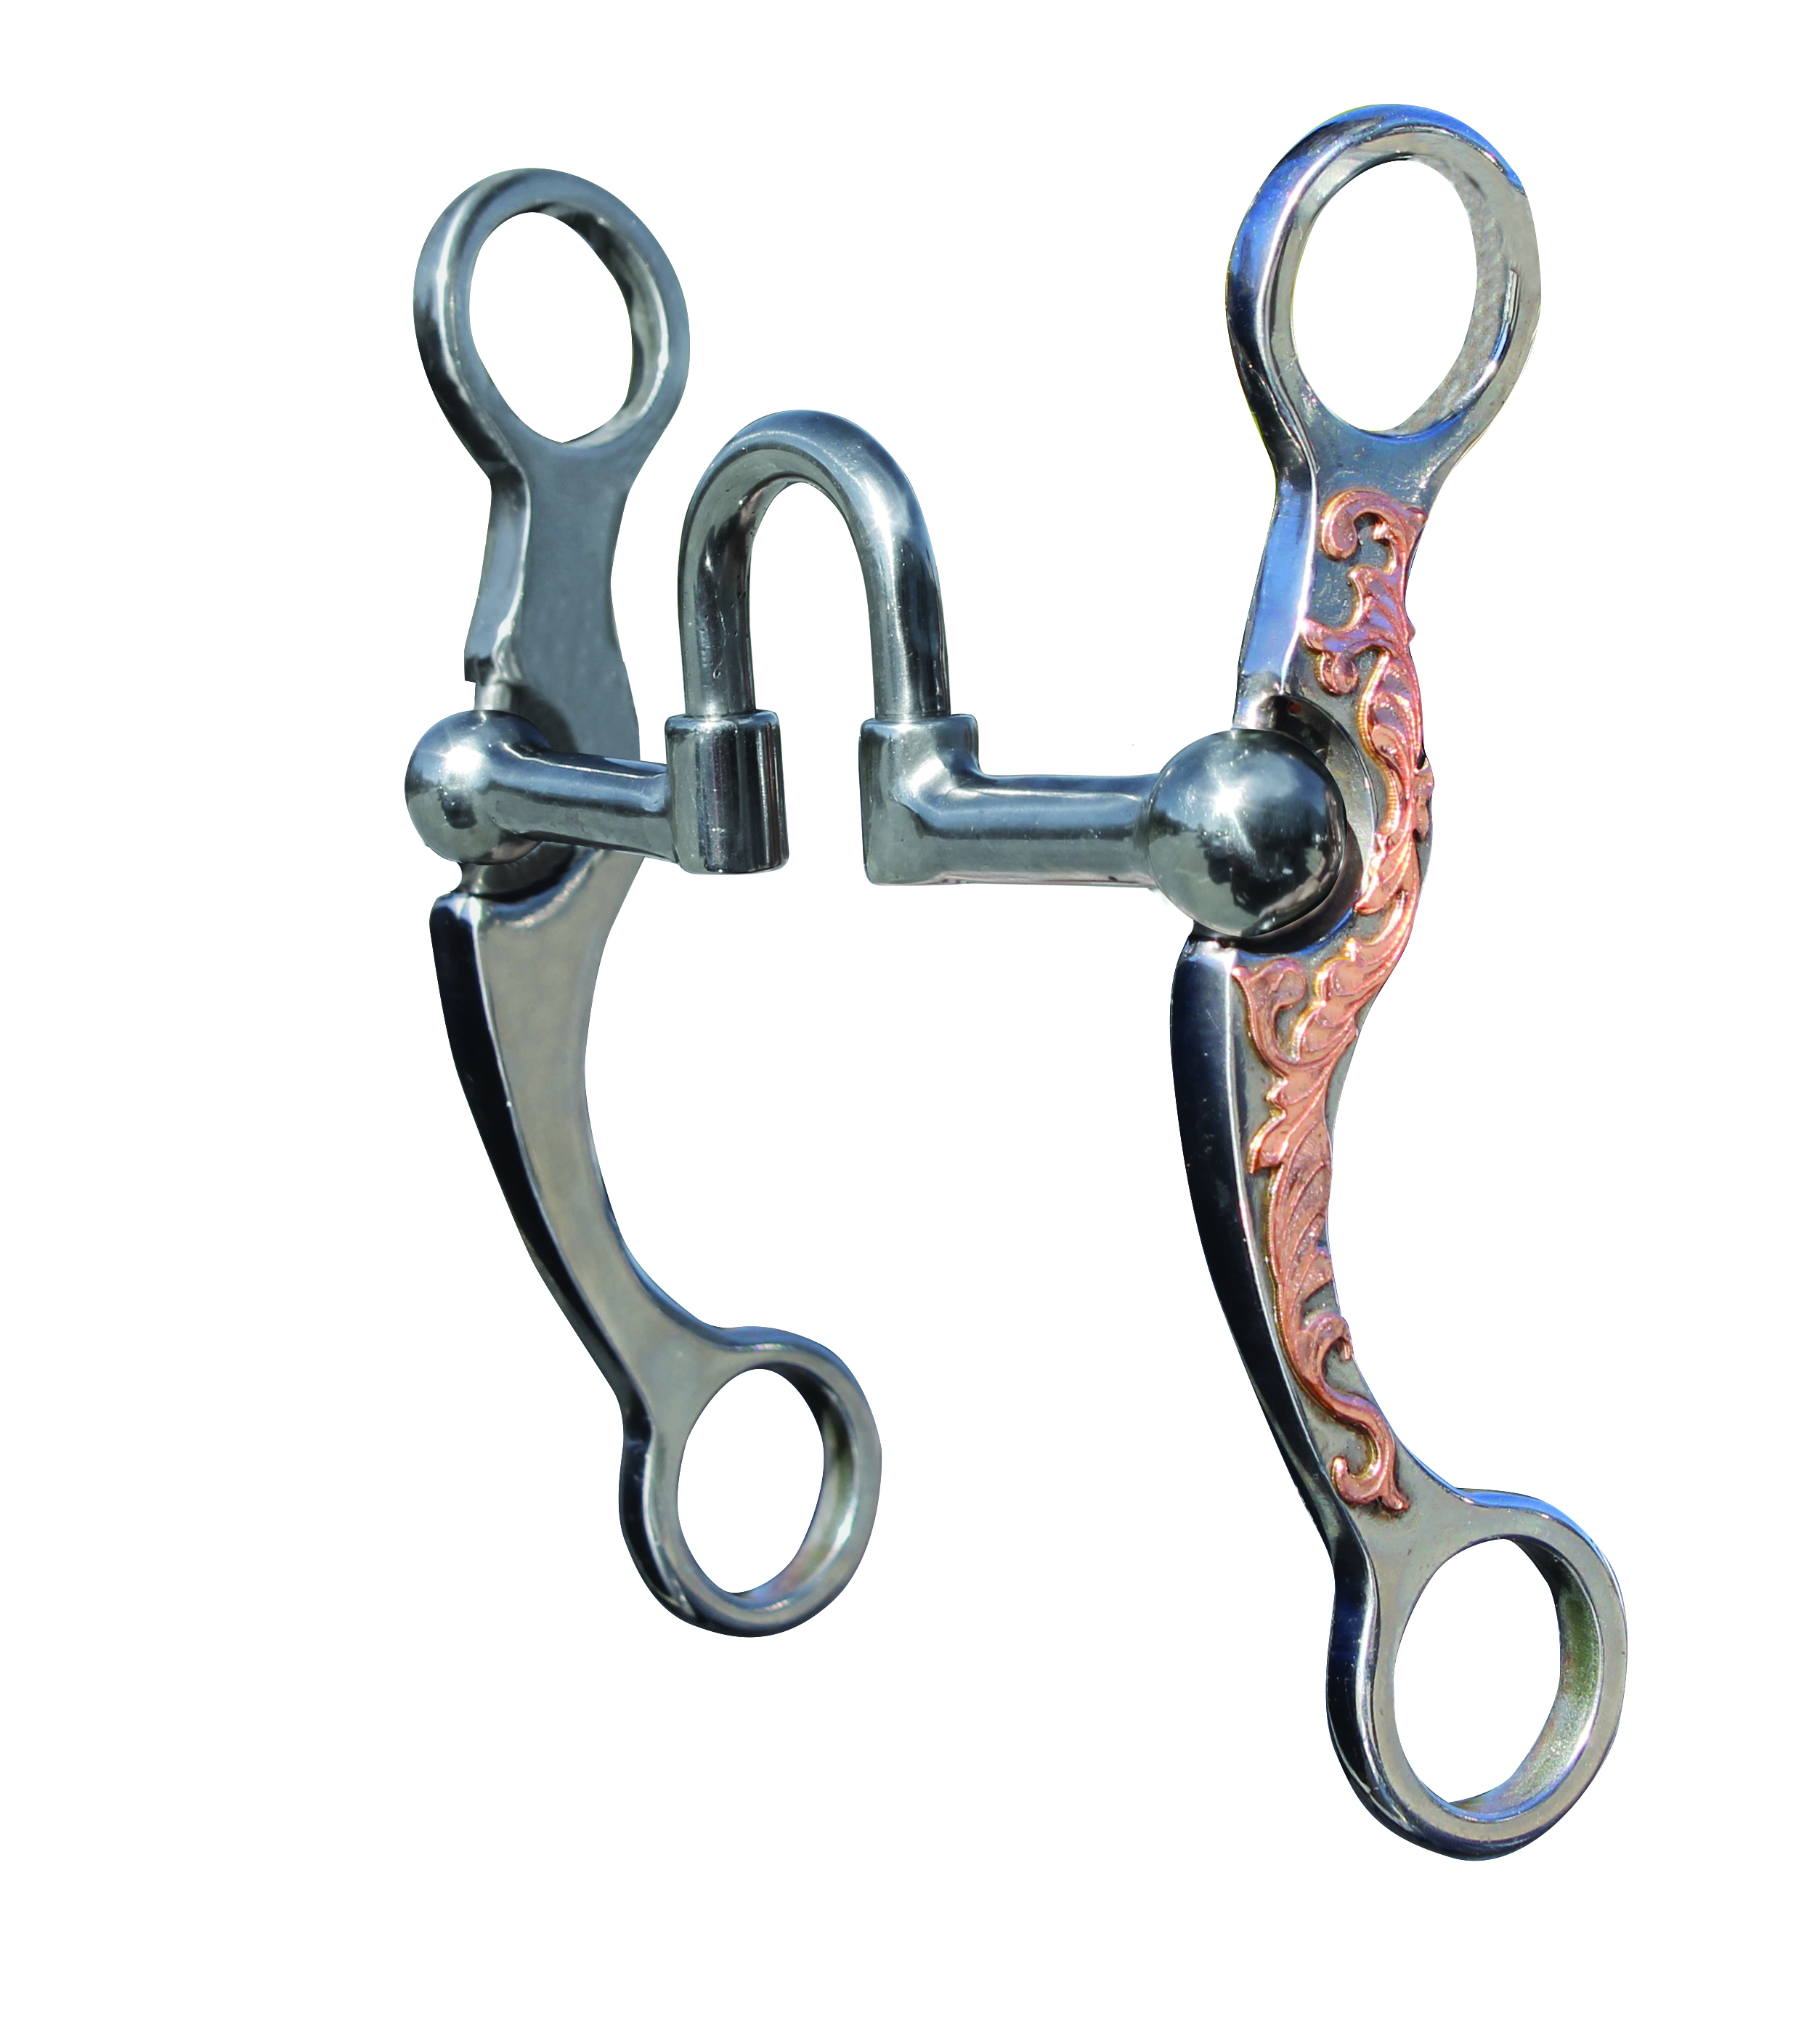 5 1/4 in Mouth Professionals Choice Horse Bit Ported Chain Sunflower U-1011 